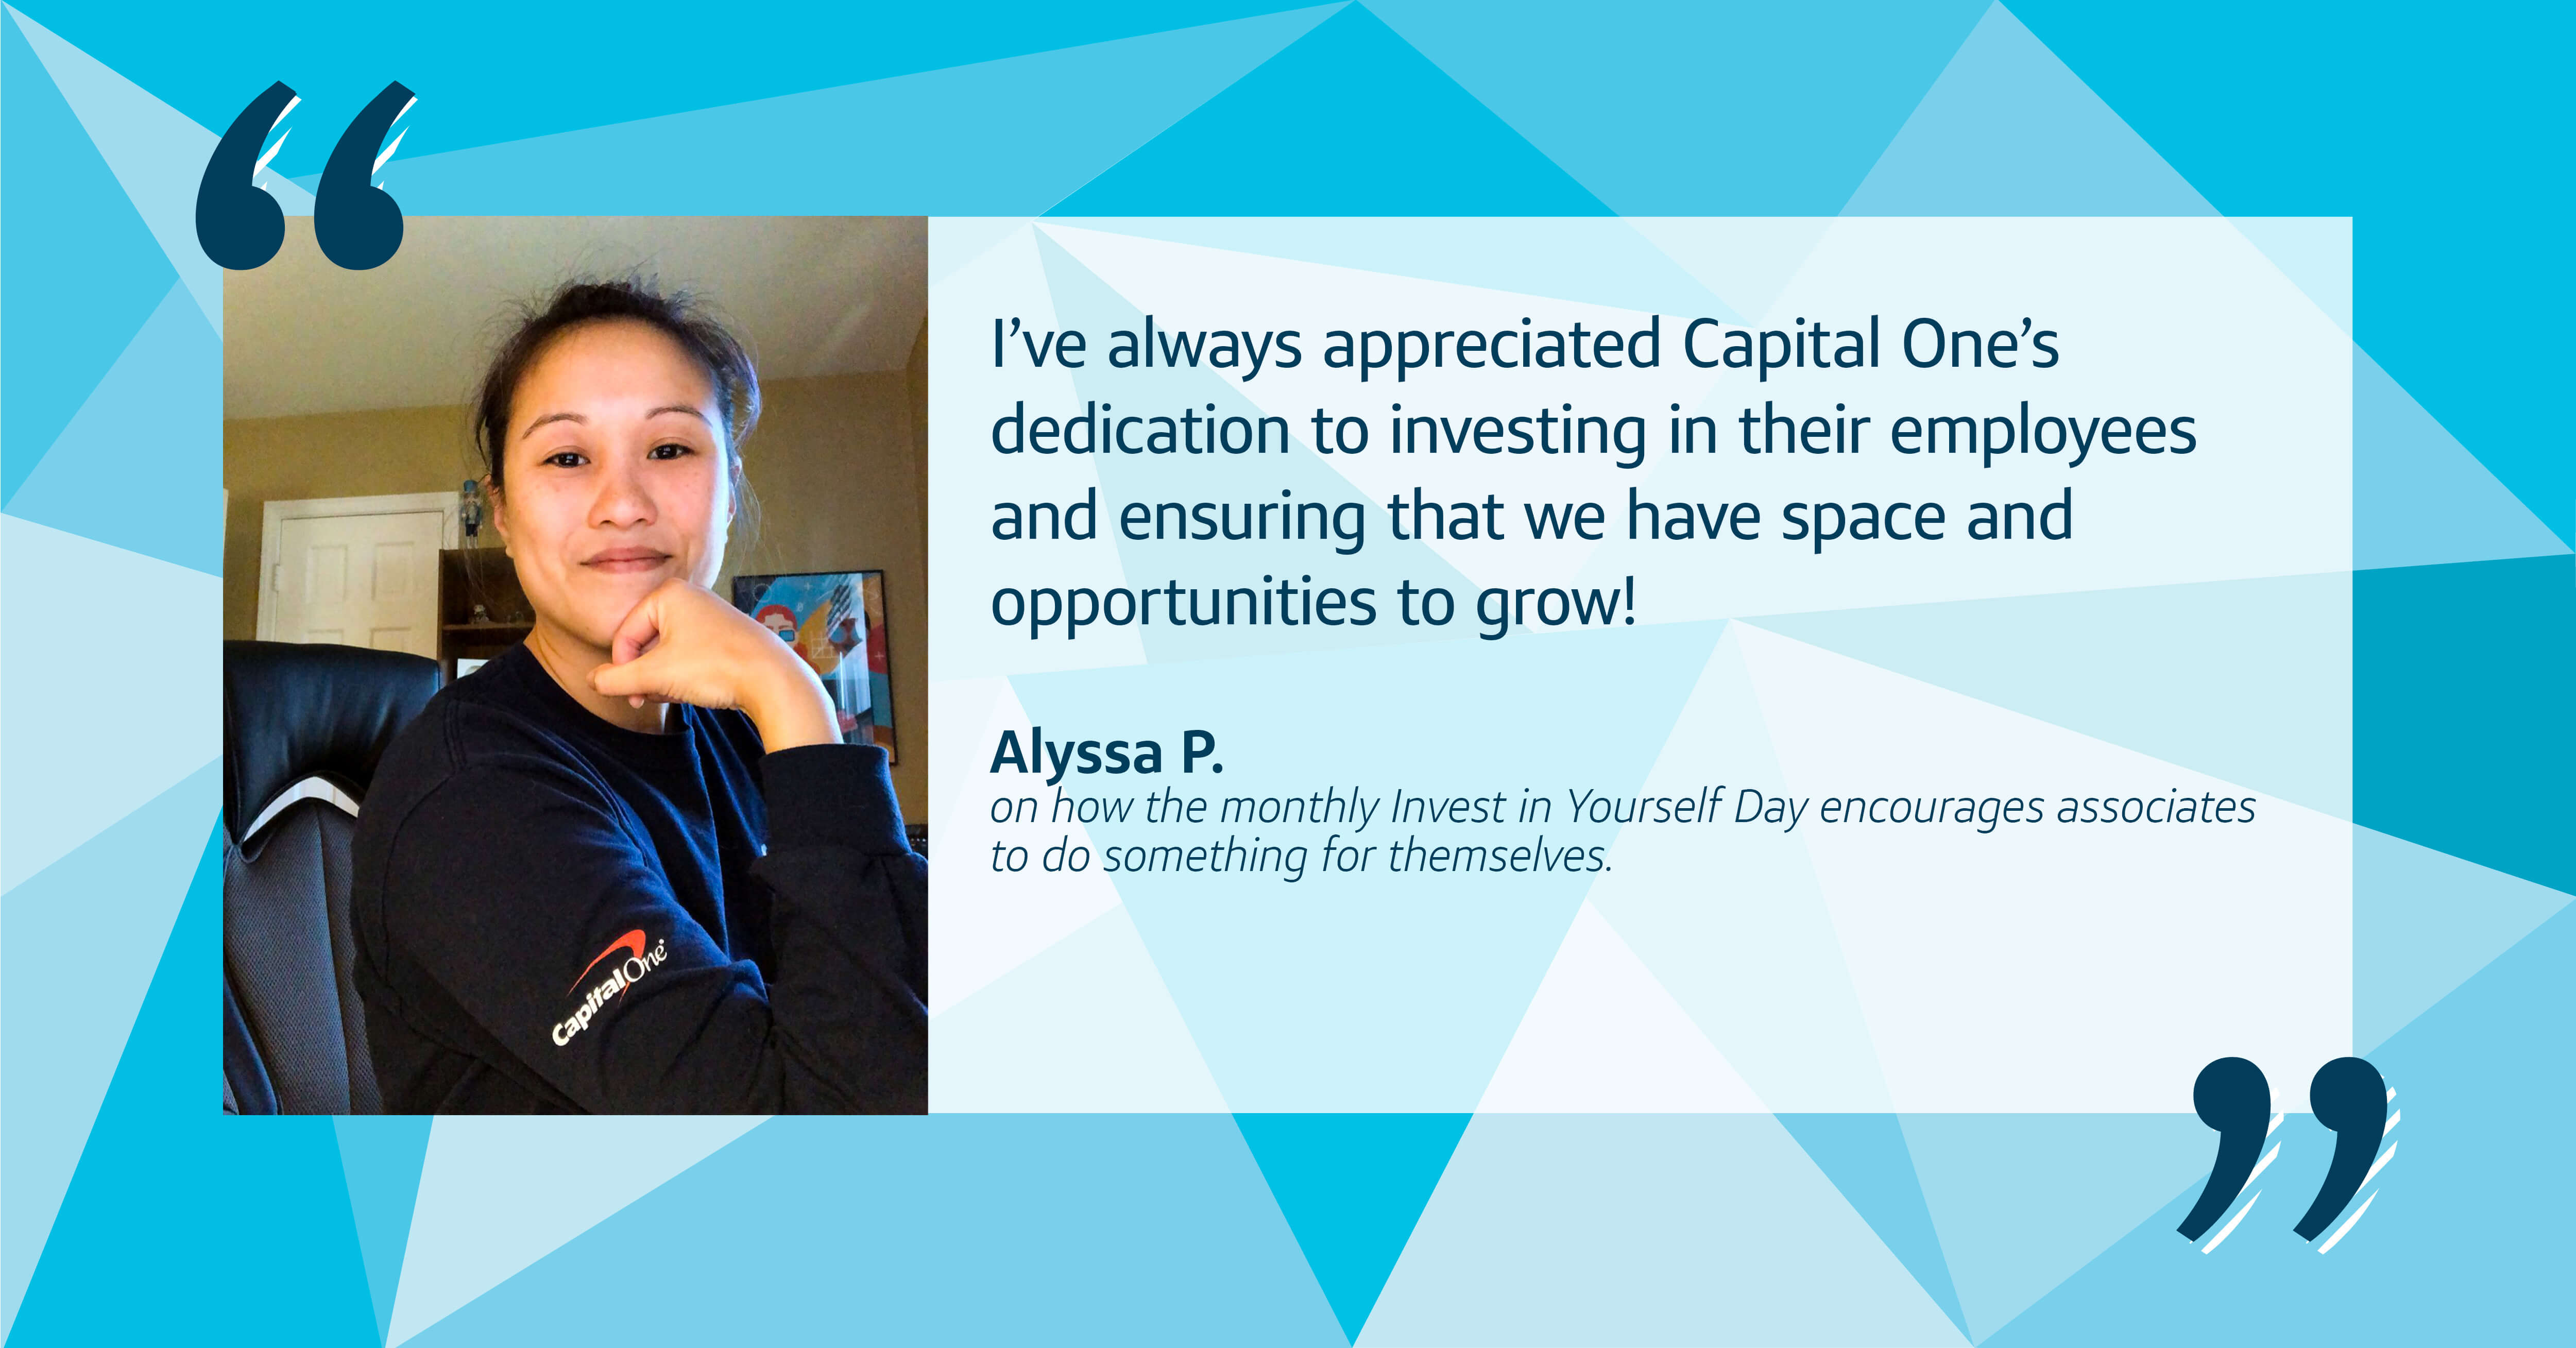 A selfie of Capital One associate Alyssa with a multi-blue triangular background with a quote from her that says, "I